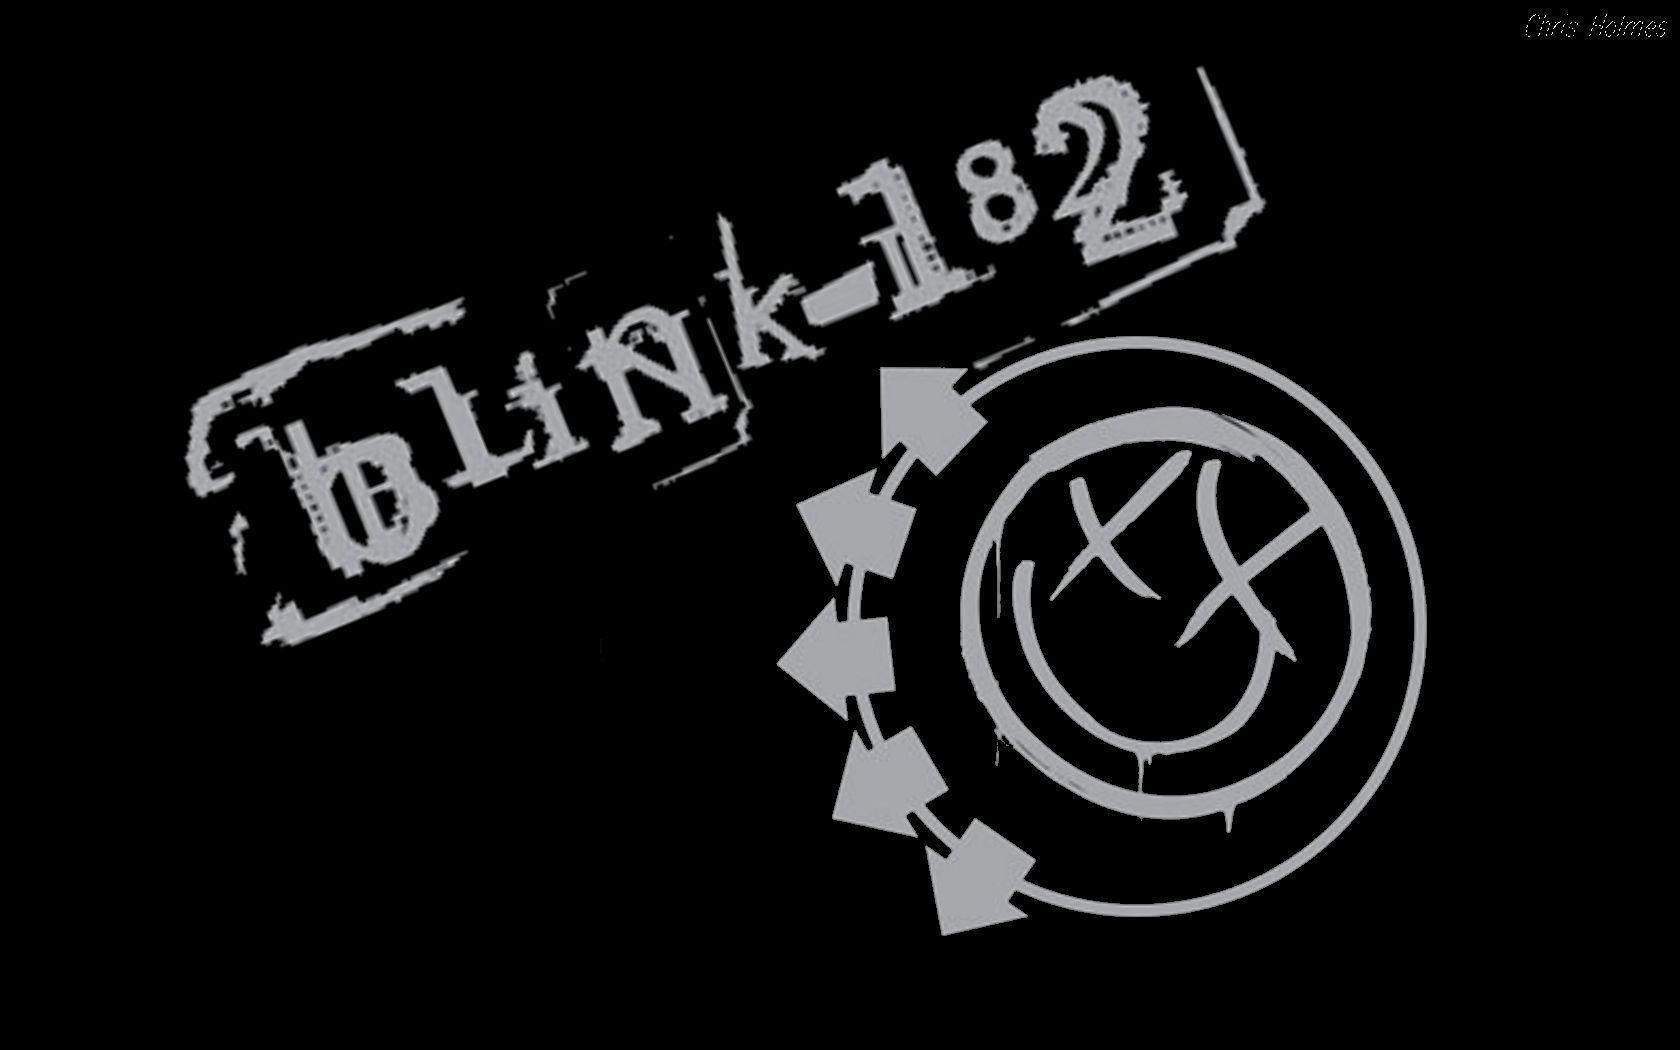 Blink 182 wallpaper by IceMan020287  Download on ZEDGE  4982